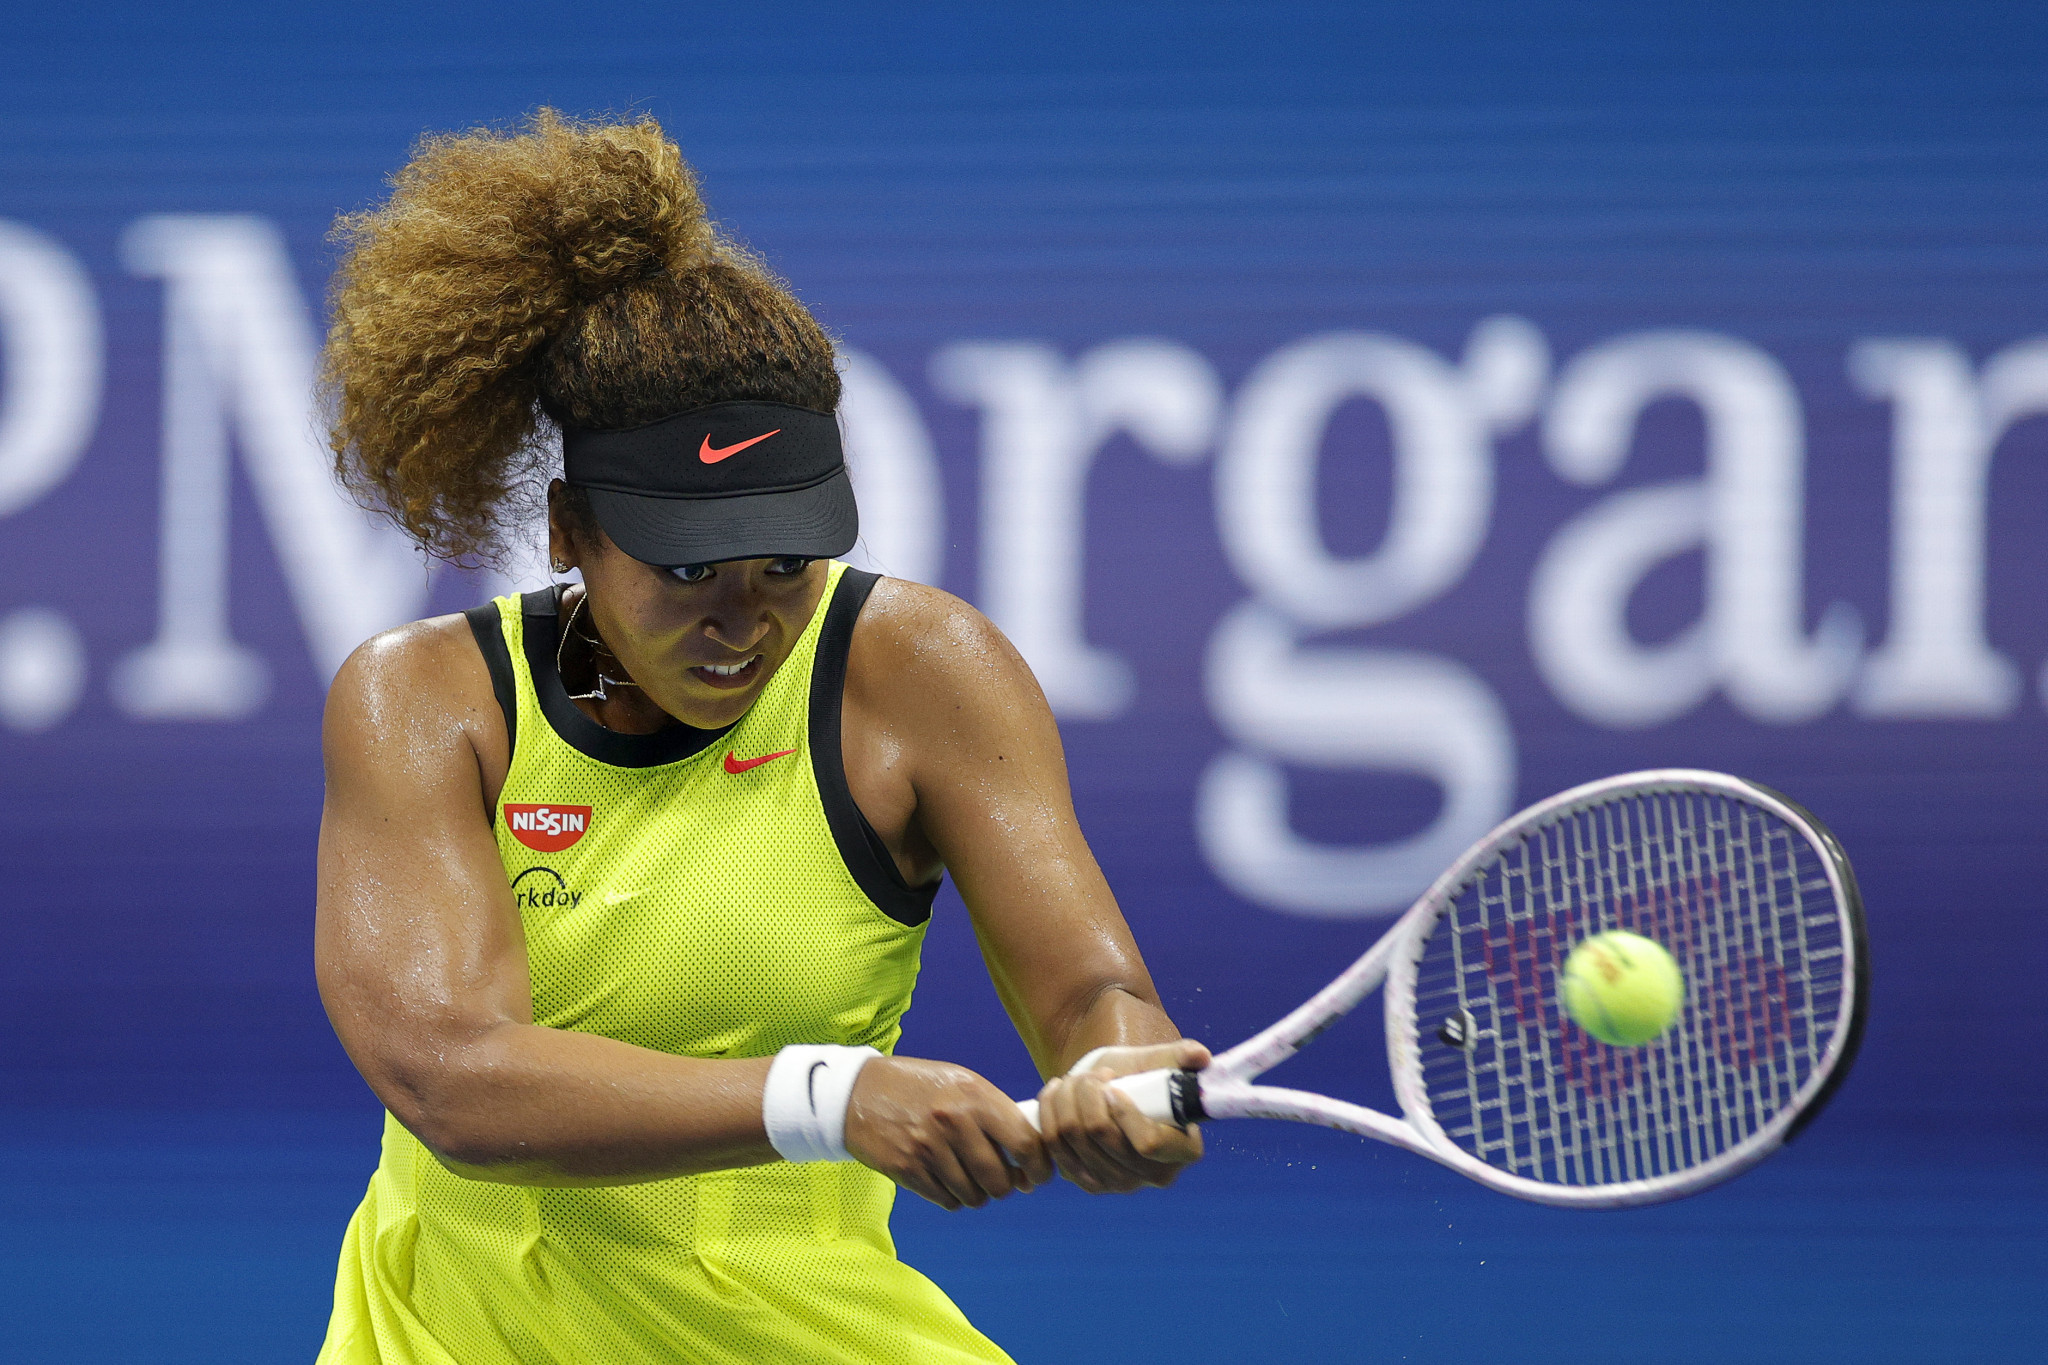 Naomi Osaka, one of the tournament favourites, has already won the US Open twice, in 2018 and 2020 ©Getty Images